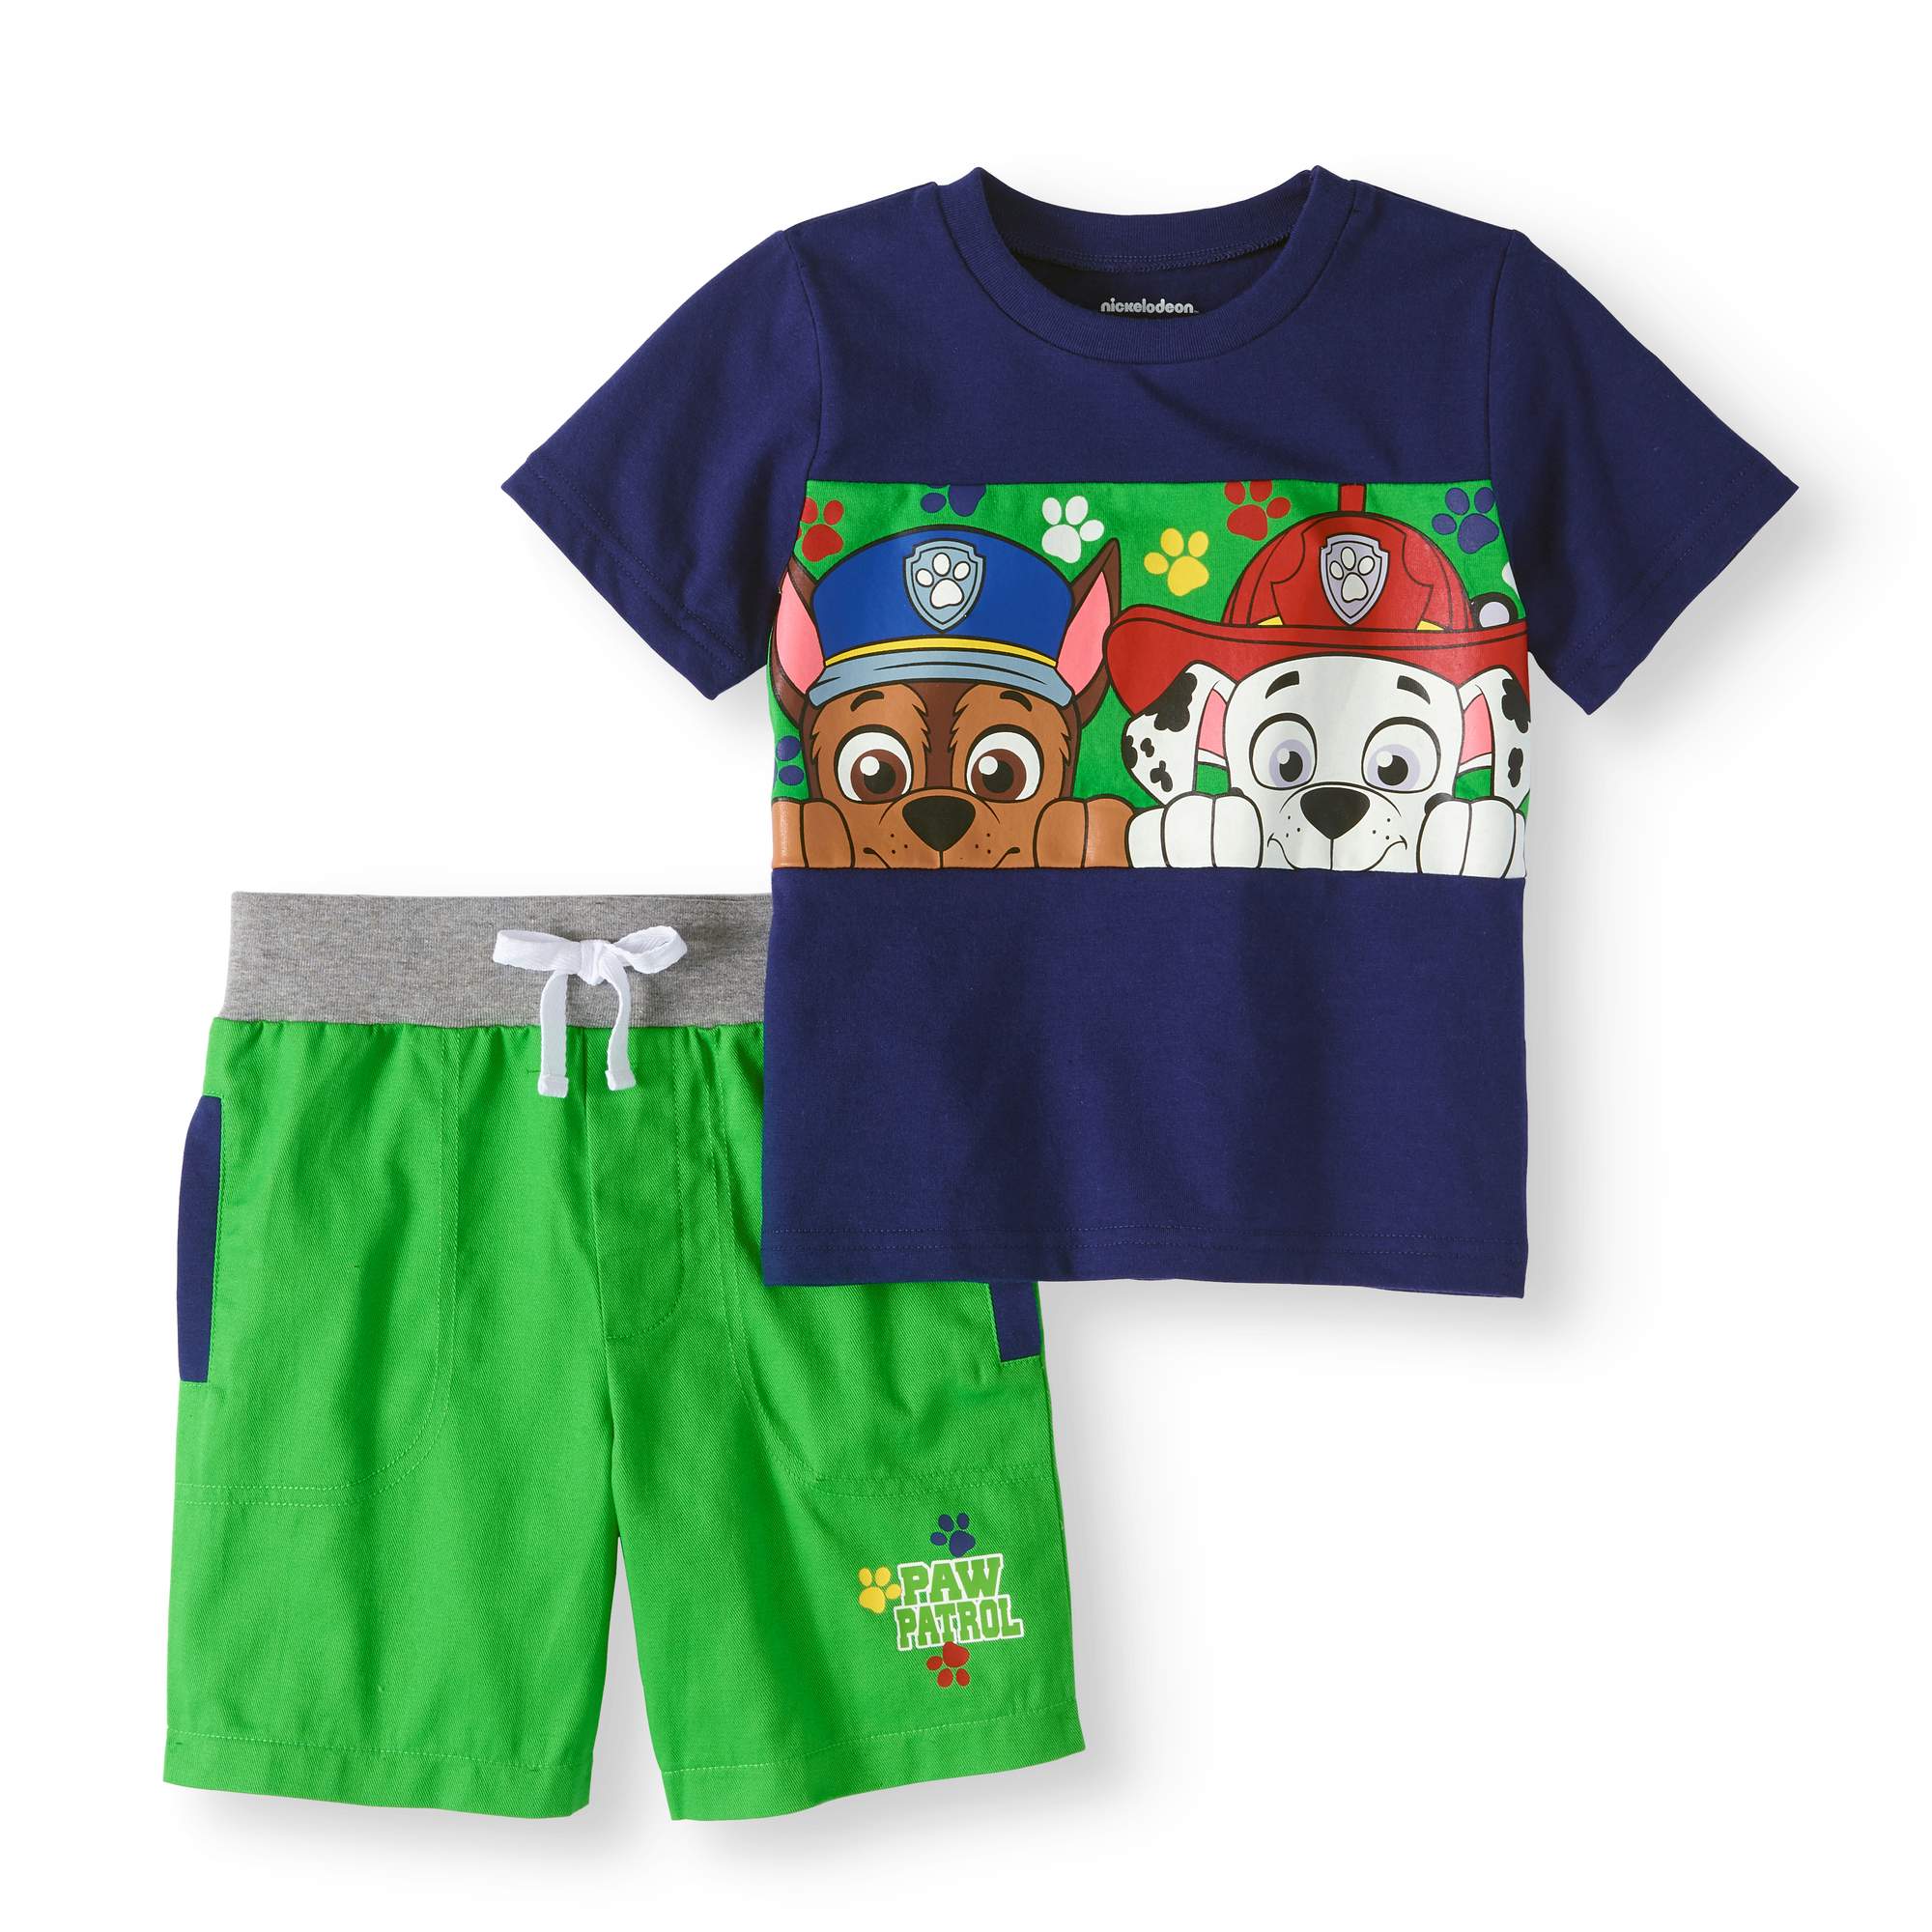 Paw Patrol Toddler Boy T-shirt & French Terry Shorts 2pc Outfit Set - image 1 of 3